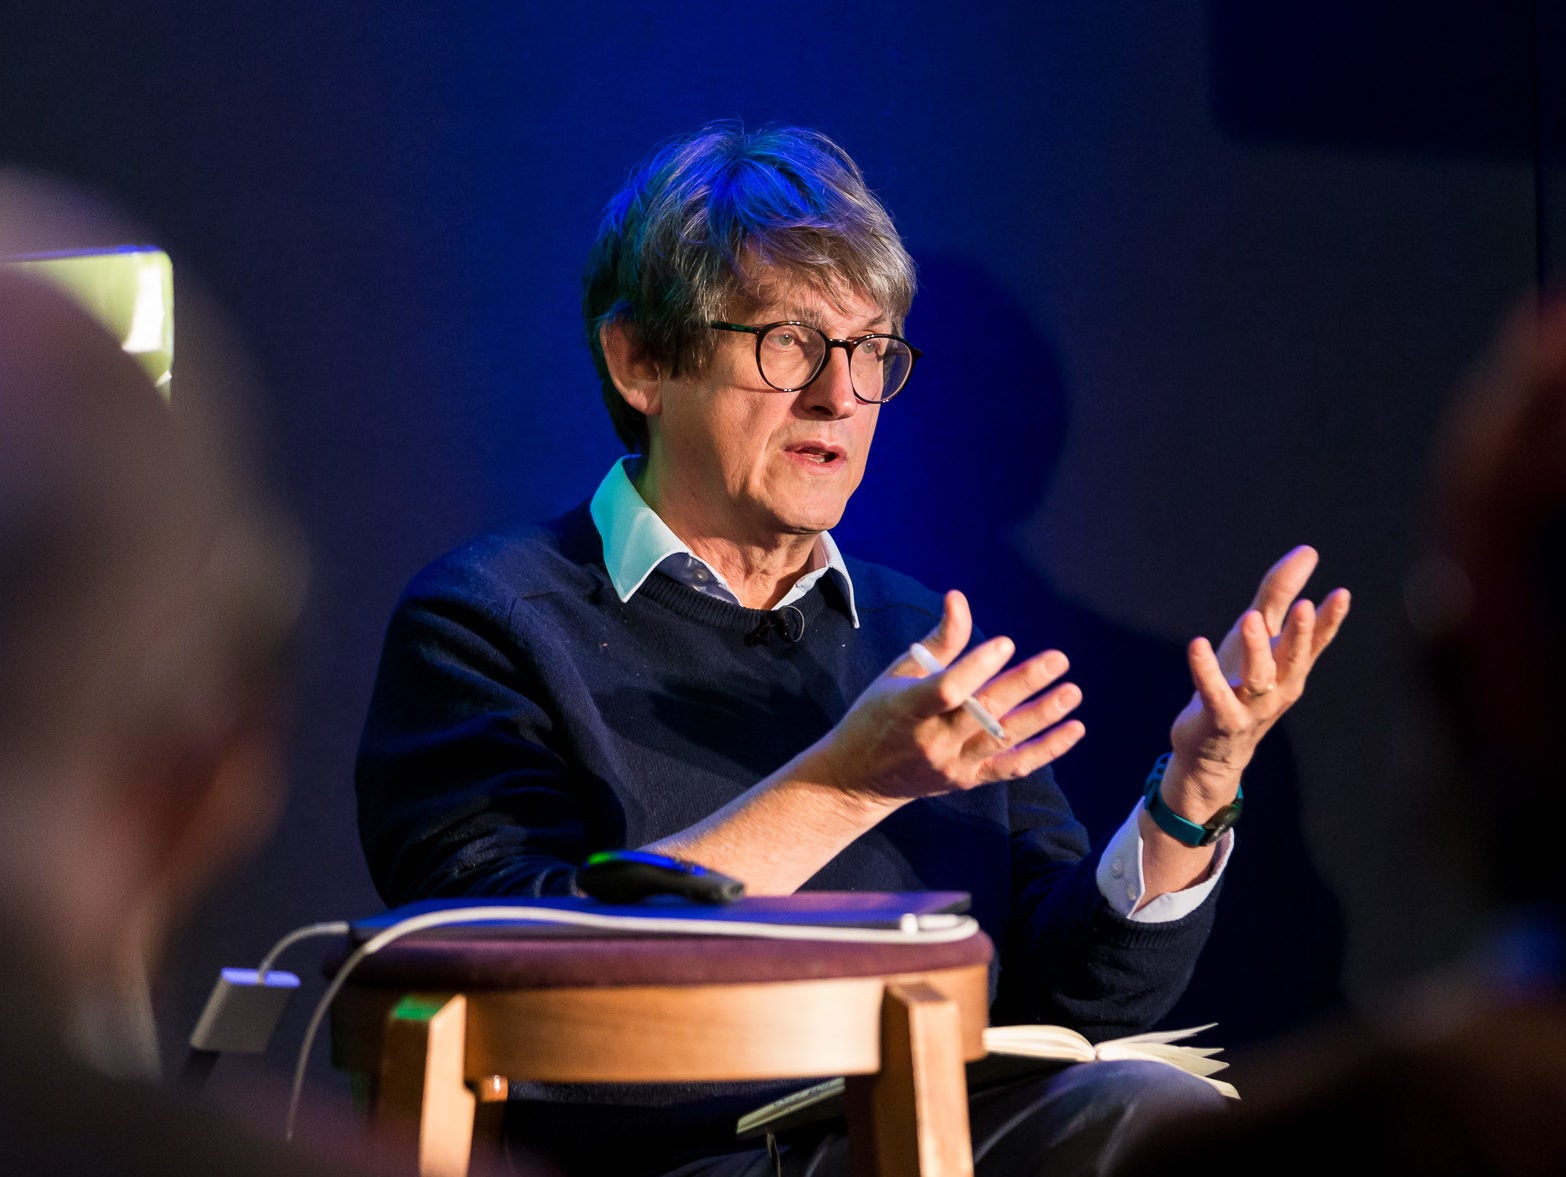 Alan Rusbridger says Guardian in a 'fantastic situation' as he hits back at ex-Daily Mail editor Paul Dacre's 'economic basket case' claim